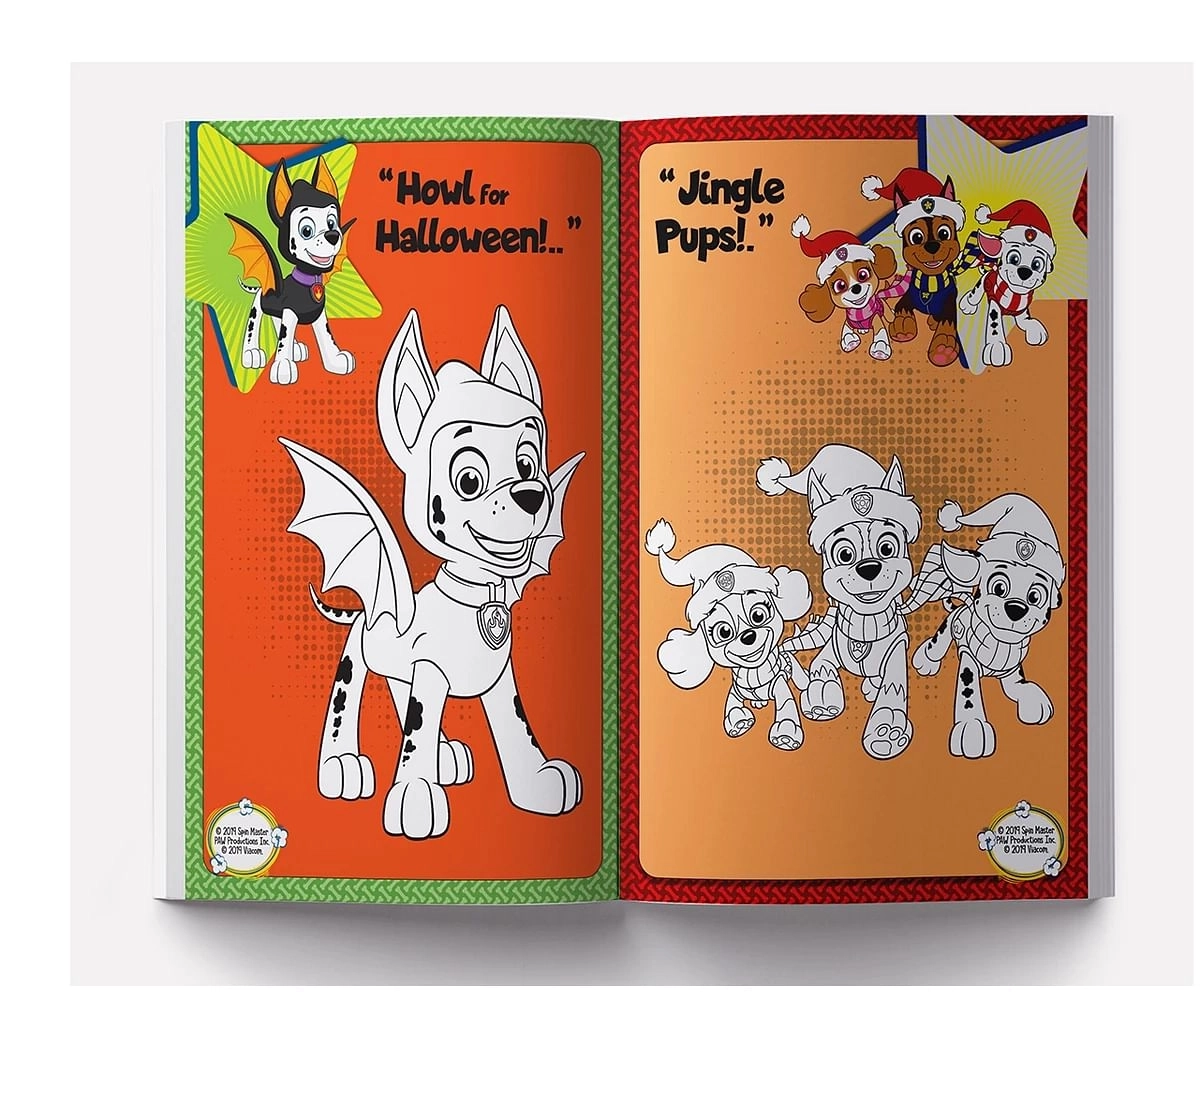 Book　Paw　Pawfect　Makes　Wonder　House　Practice　for　Multicolour　kids　Books　Patrol　Coloring　Giant　3Y+,